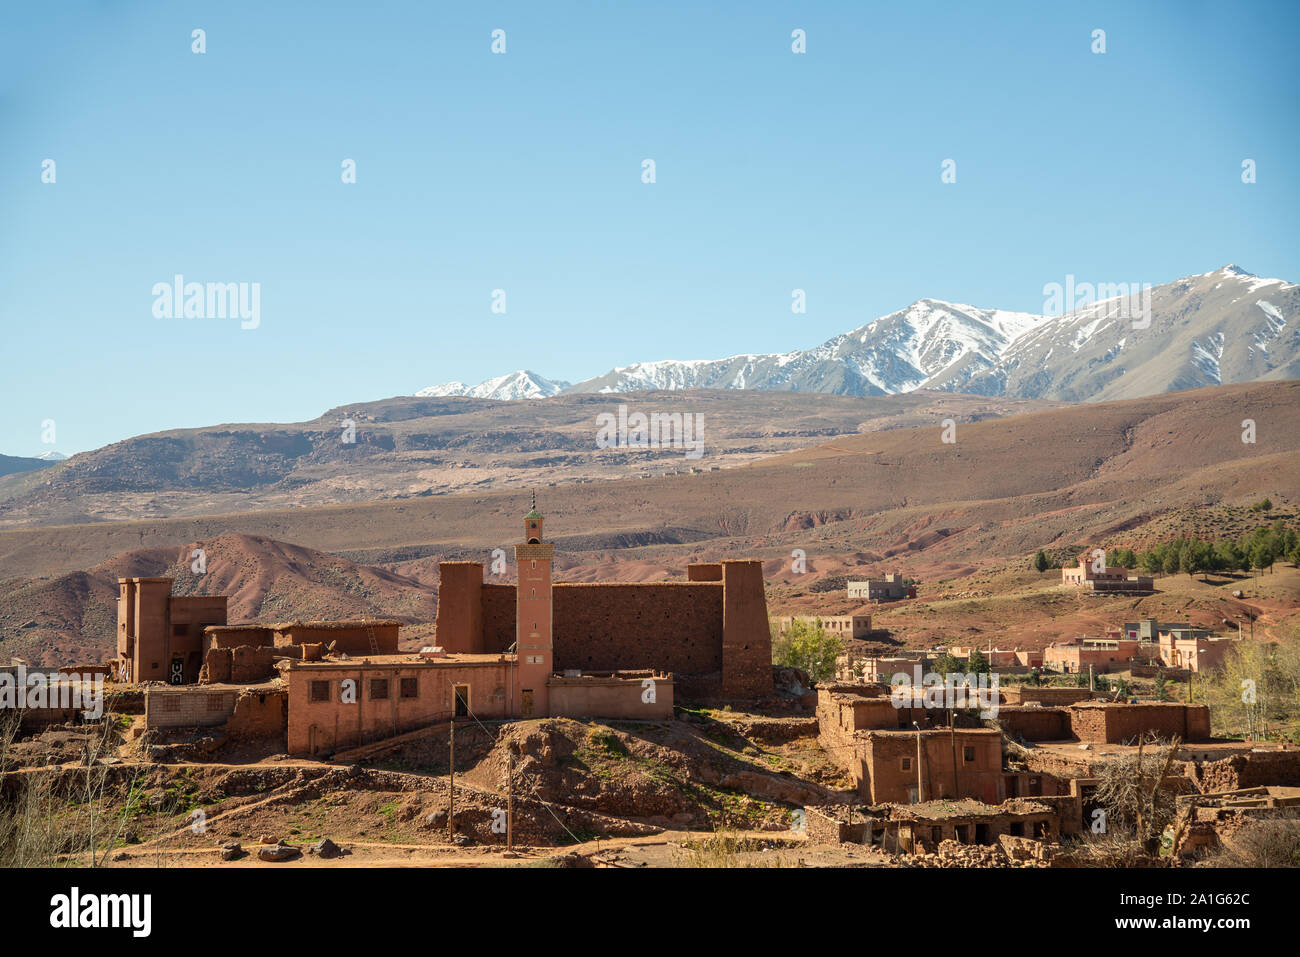 view at village in High Atlas mountain area of southern Morocco Stock Photo